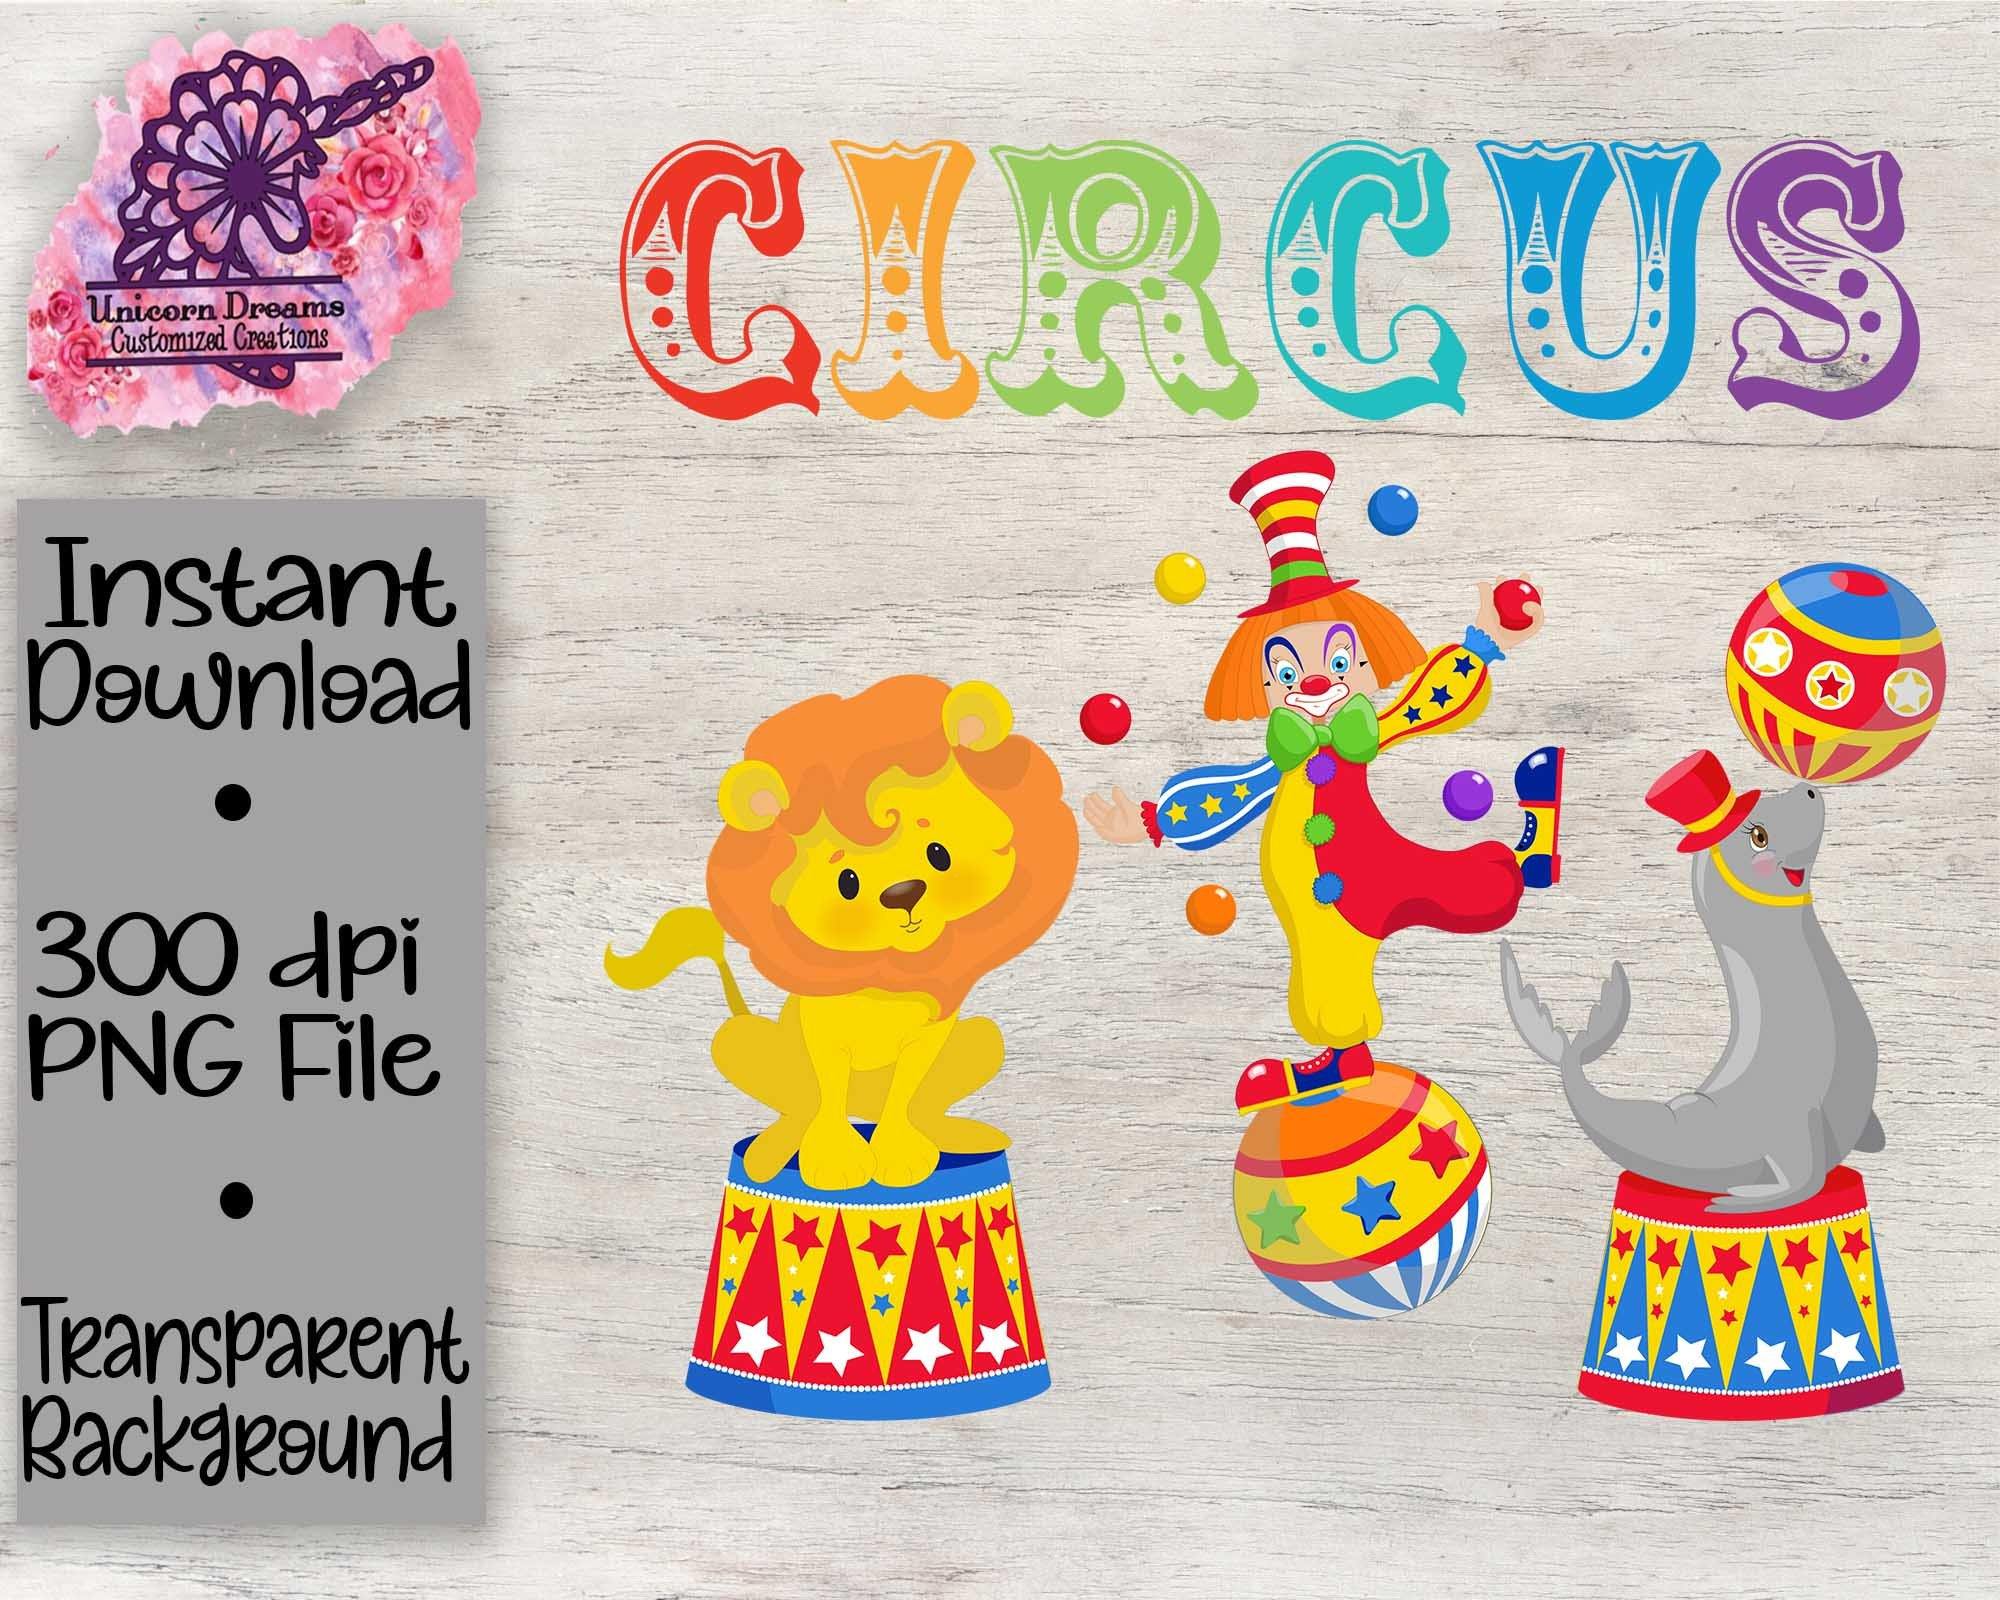 Circus PNG Digital Download - Unicorn Dreams Customized Creations